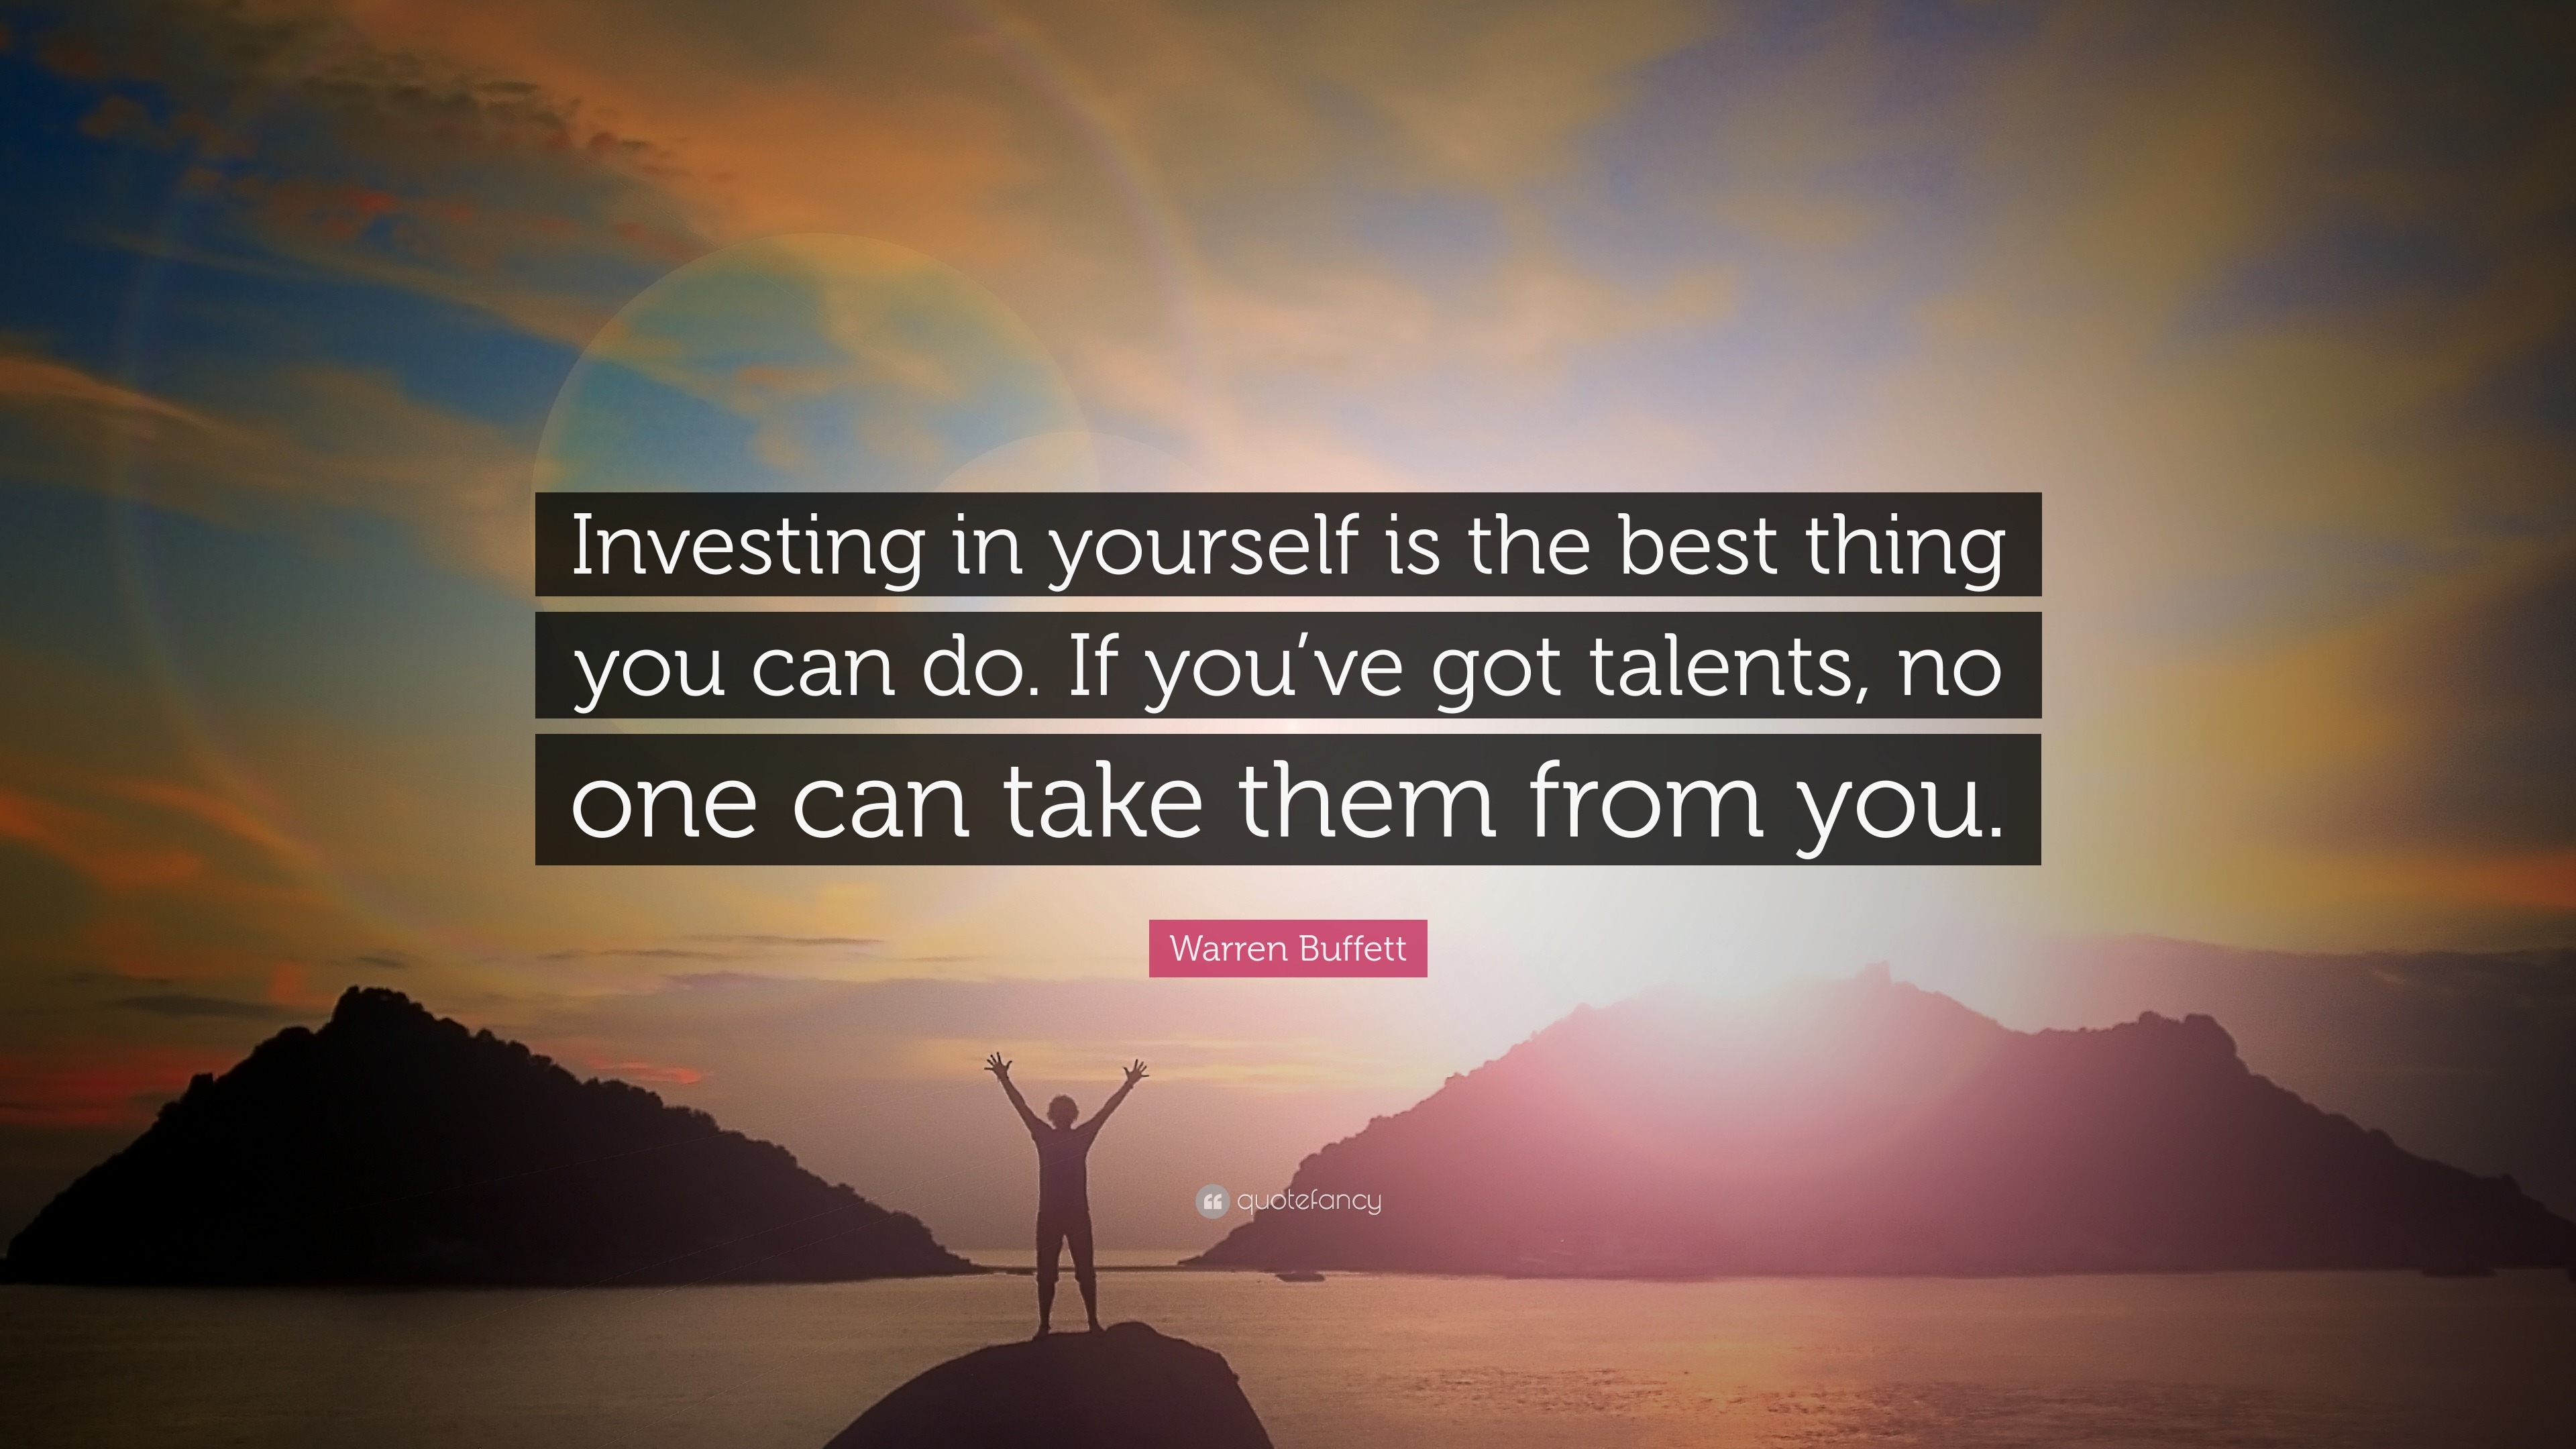 1487740 Warren Buffett Quote Investing in yourself is the best thing you